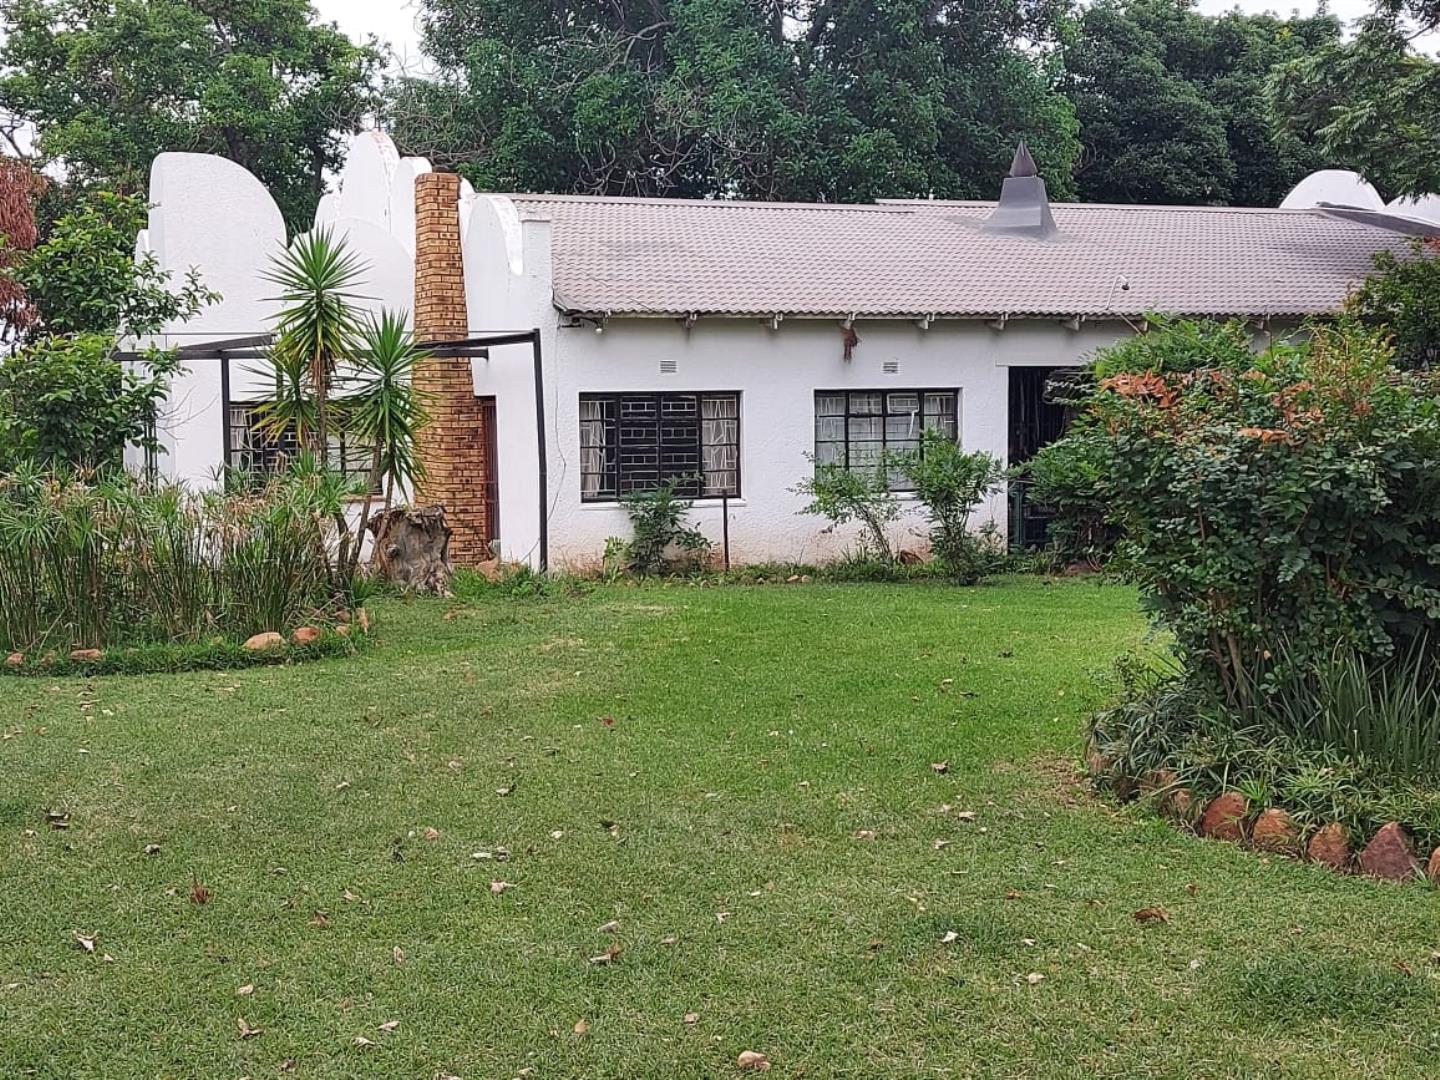 4 Bedroom Game Farm or Lodge for Sale - Limpopo